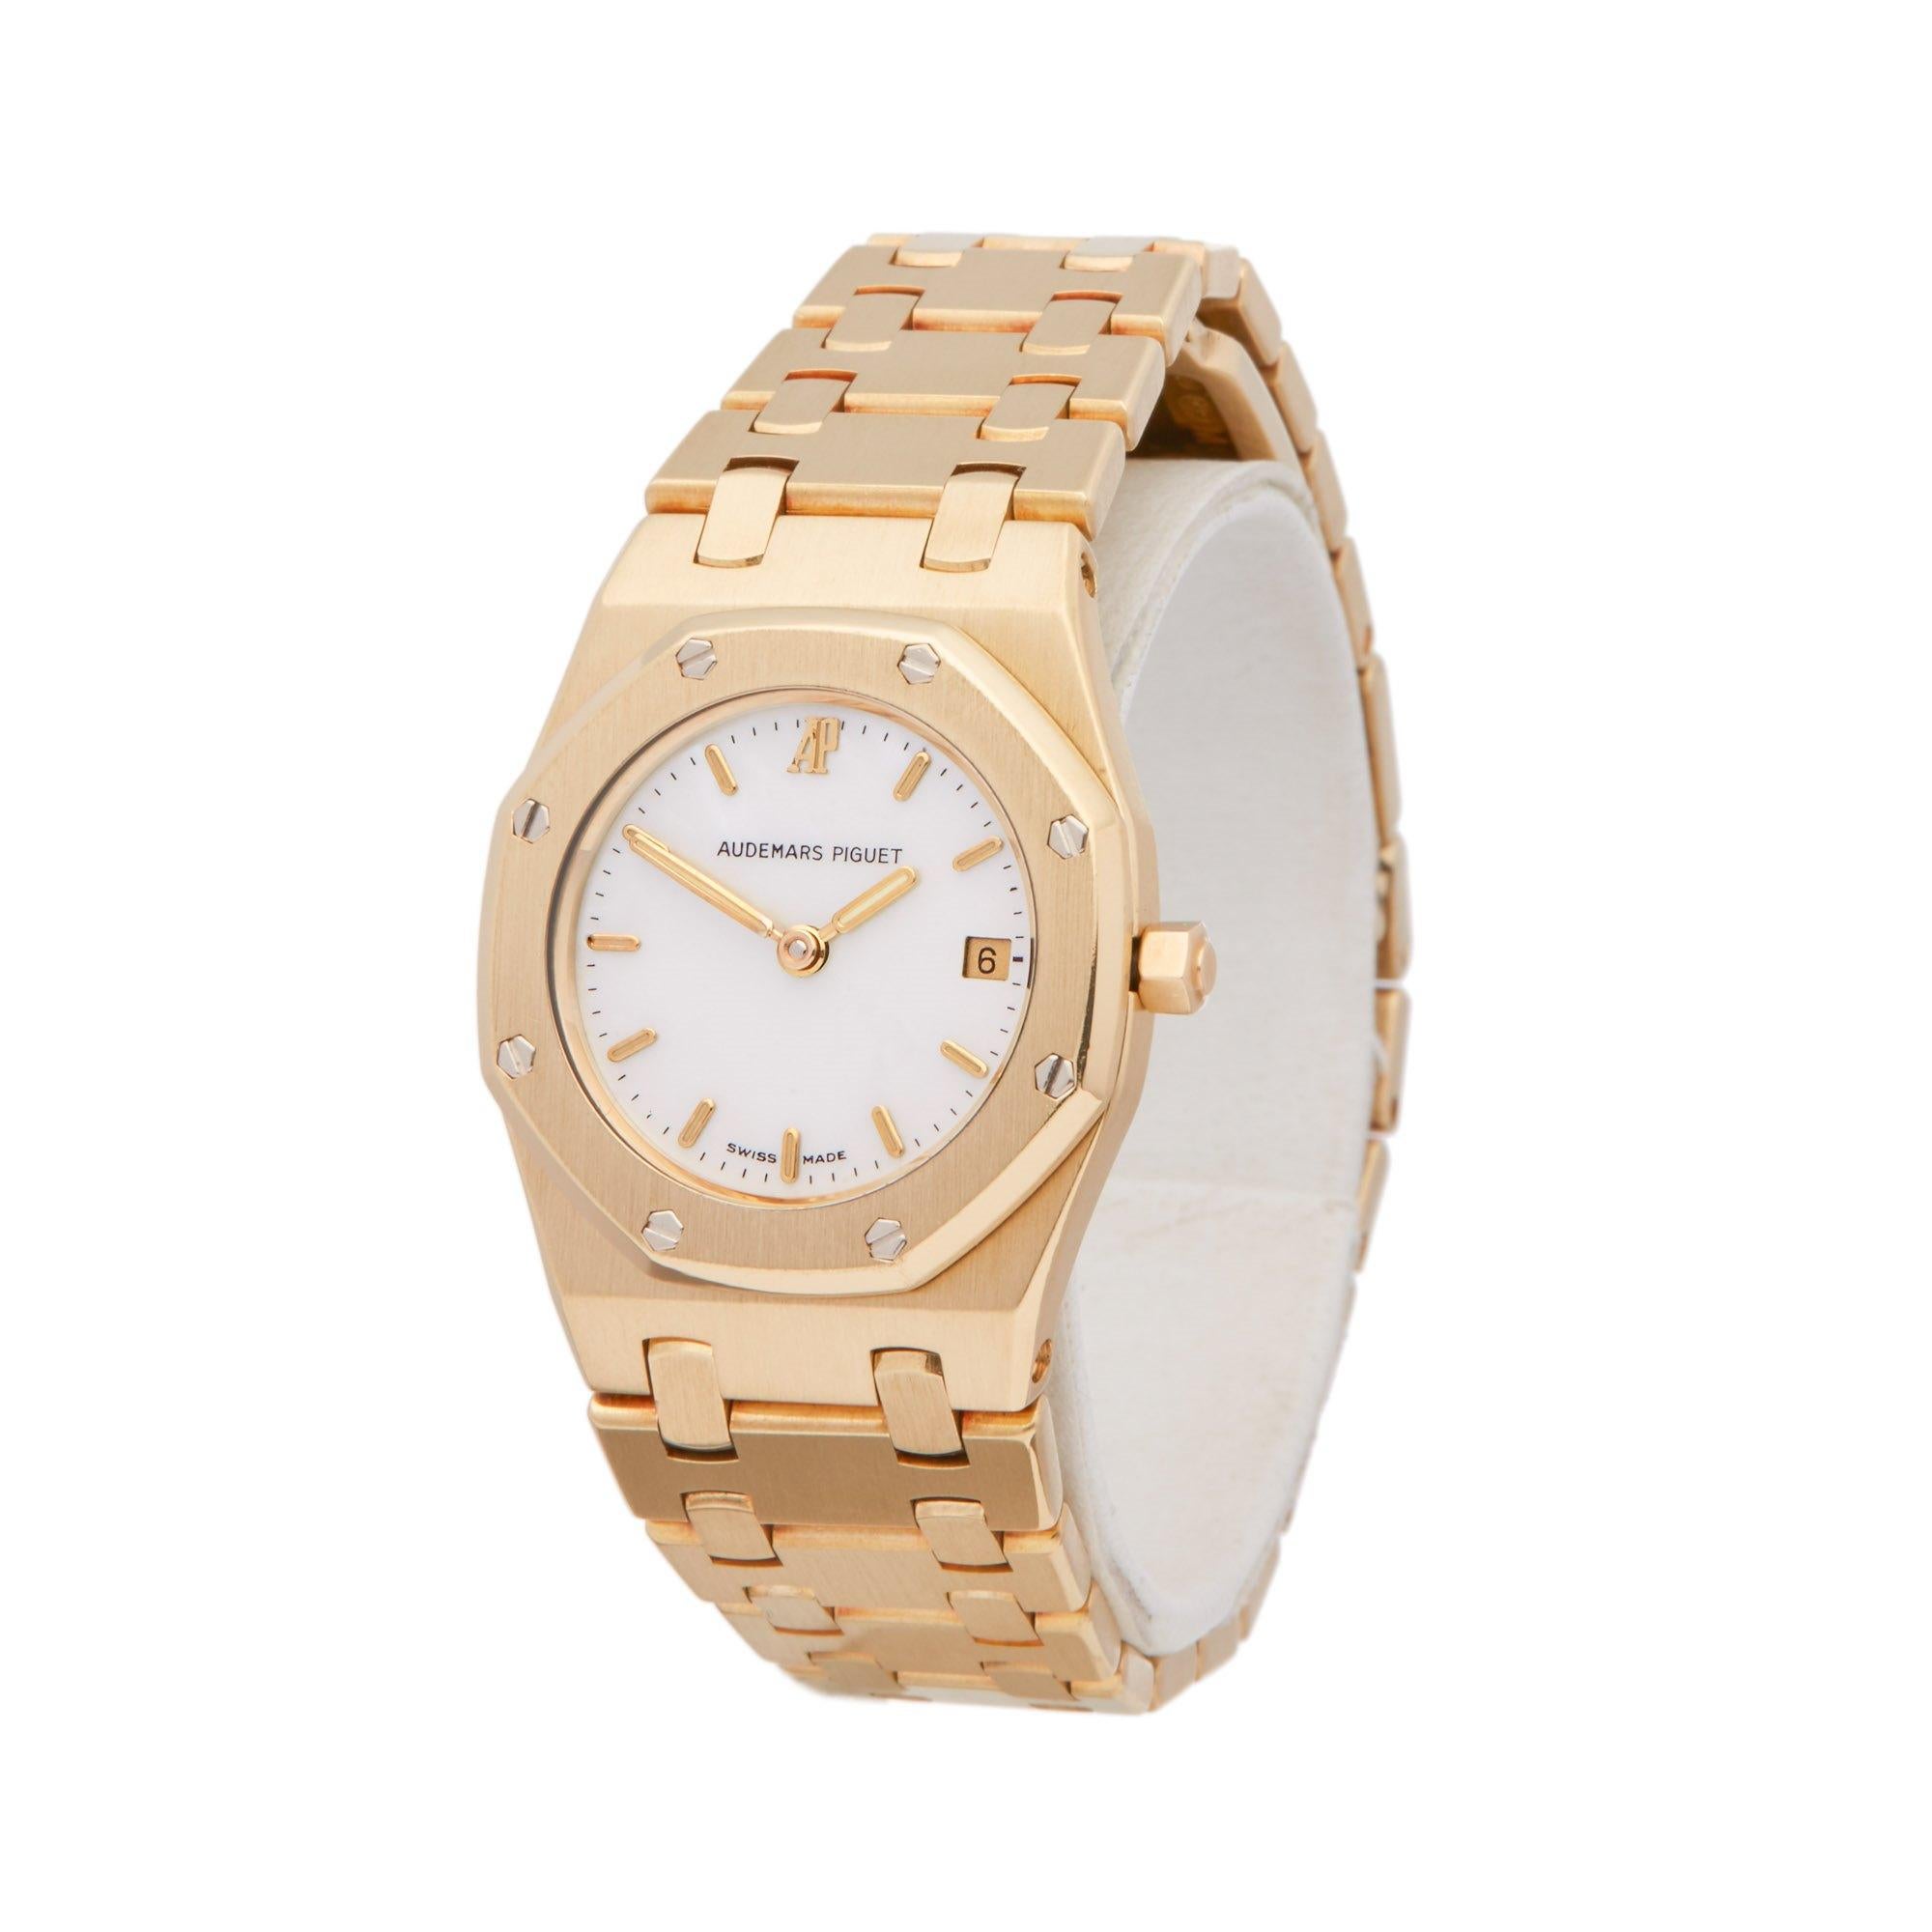 Xupes Reference: COM002498
Manufacturer: Audemars Piguet
Model: Royal Oak
Model Variant: 
Model Number: 66270BA
Age: 1990
Gender: Ladies
Complete With: Audemars Piguet Box 
Dial: Mother of Pearl Batton
Glass: Sapphire Crystal
Case Material: Yellow